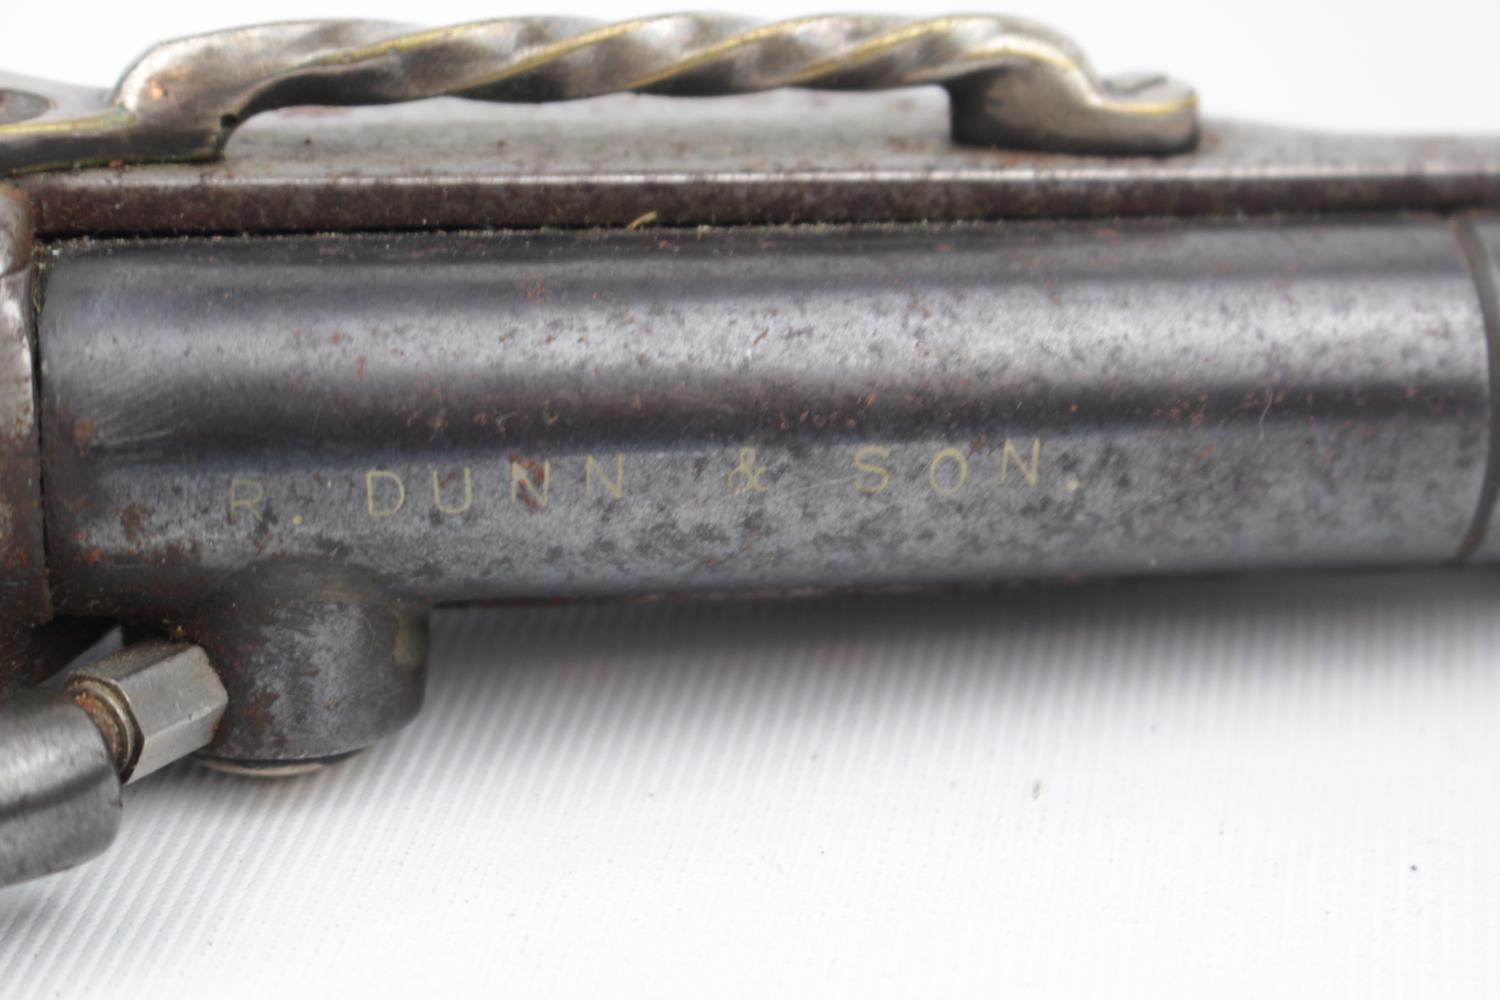 Interesting R Dunn & Son metal bodied percussion pistol with brass handled ram rod, engraved W - Image 3 of 3